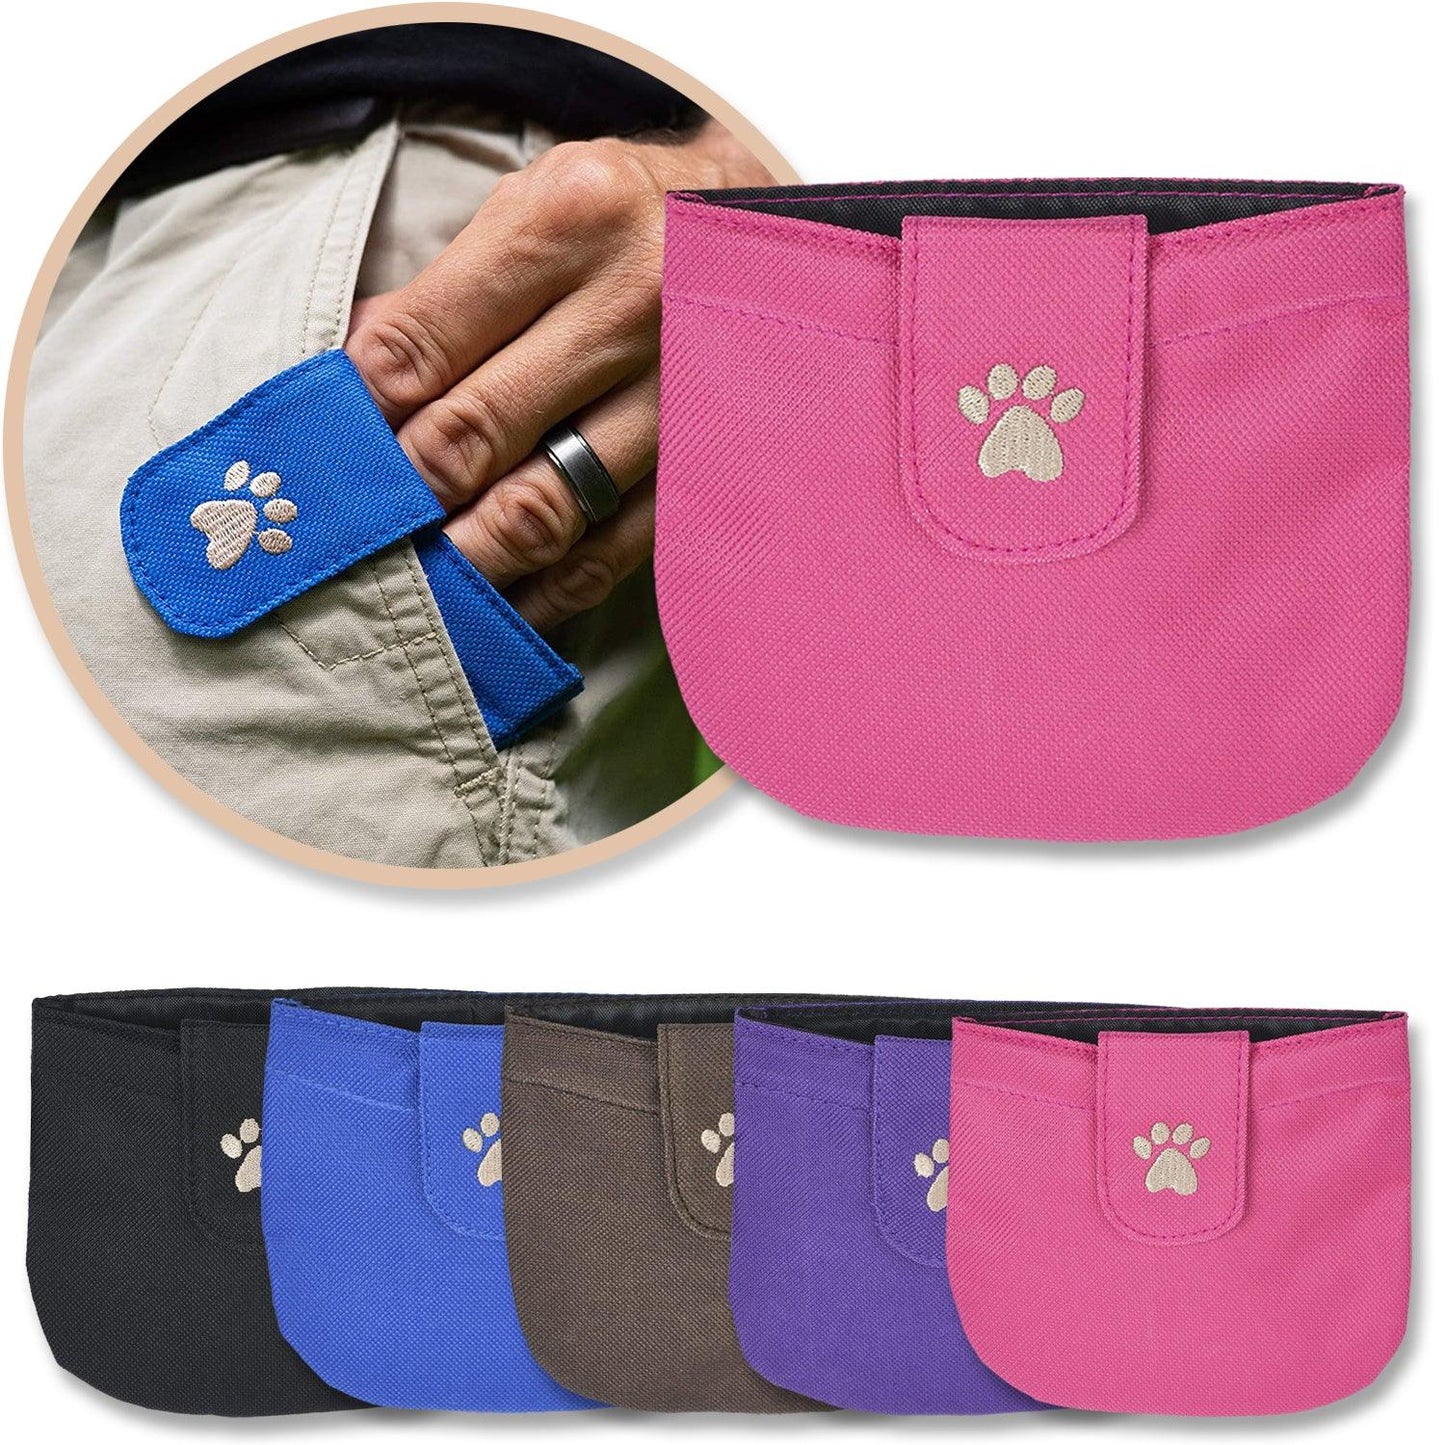 Pink pocket treat pouch shown with a variety of five colors